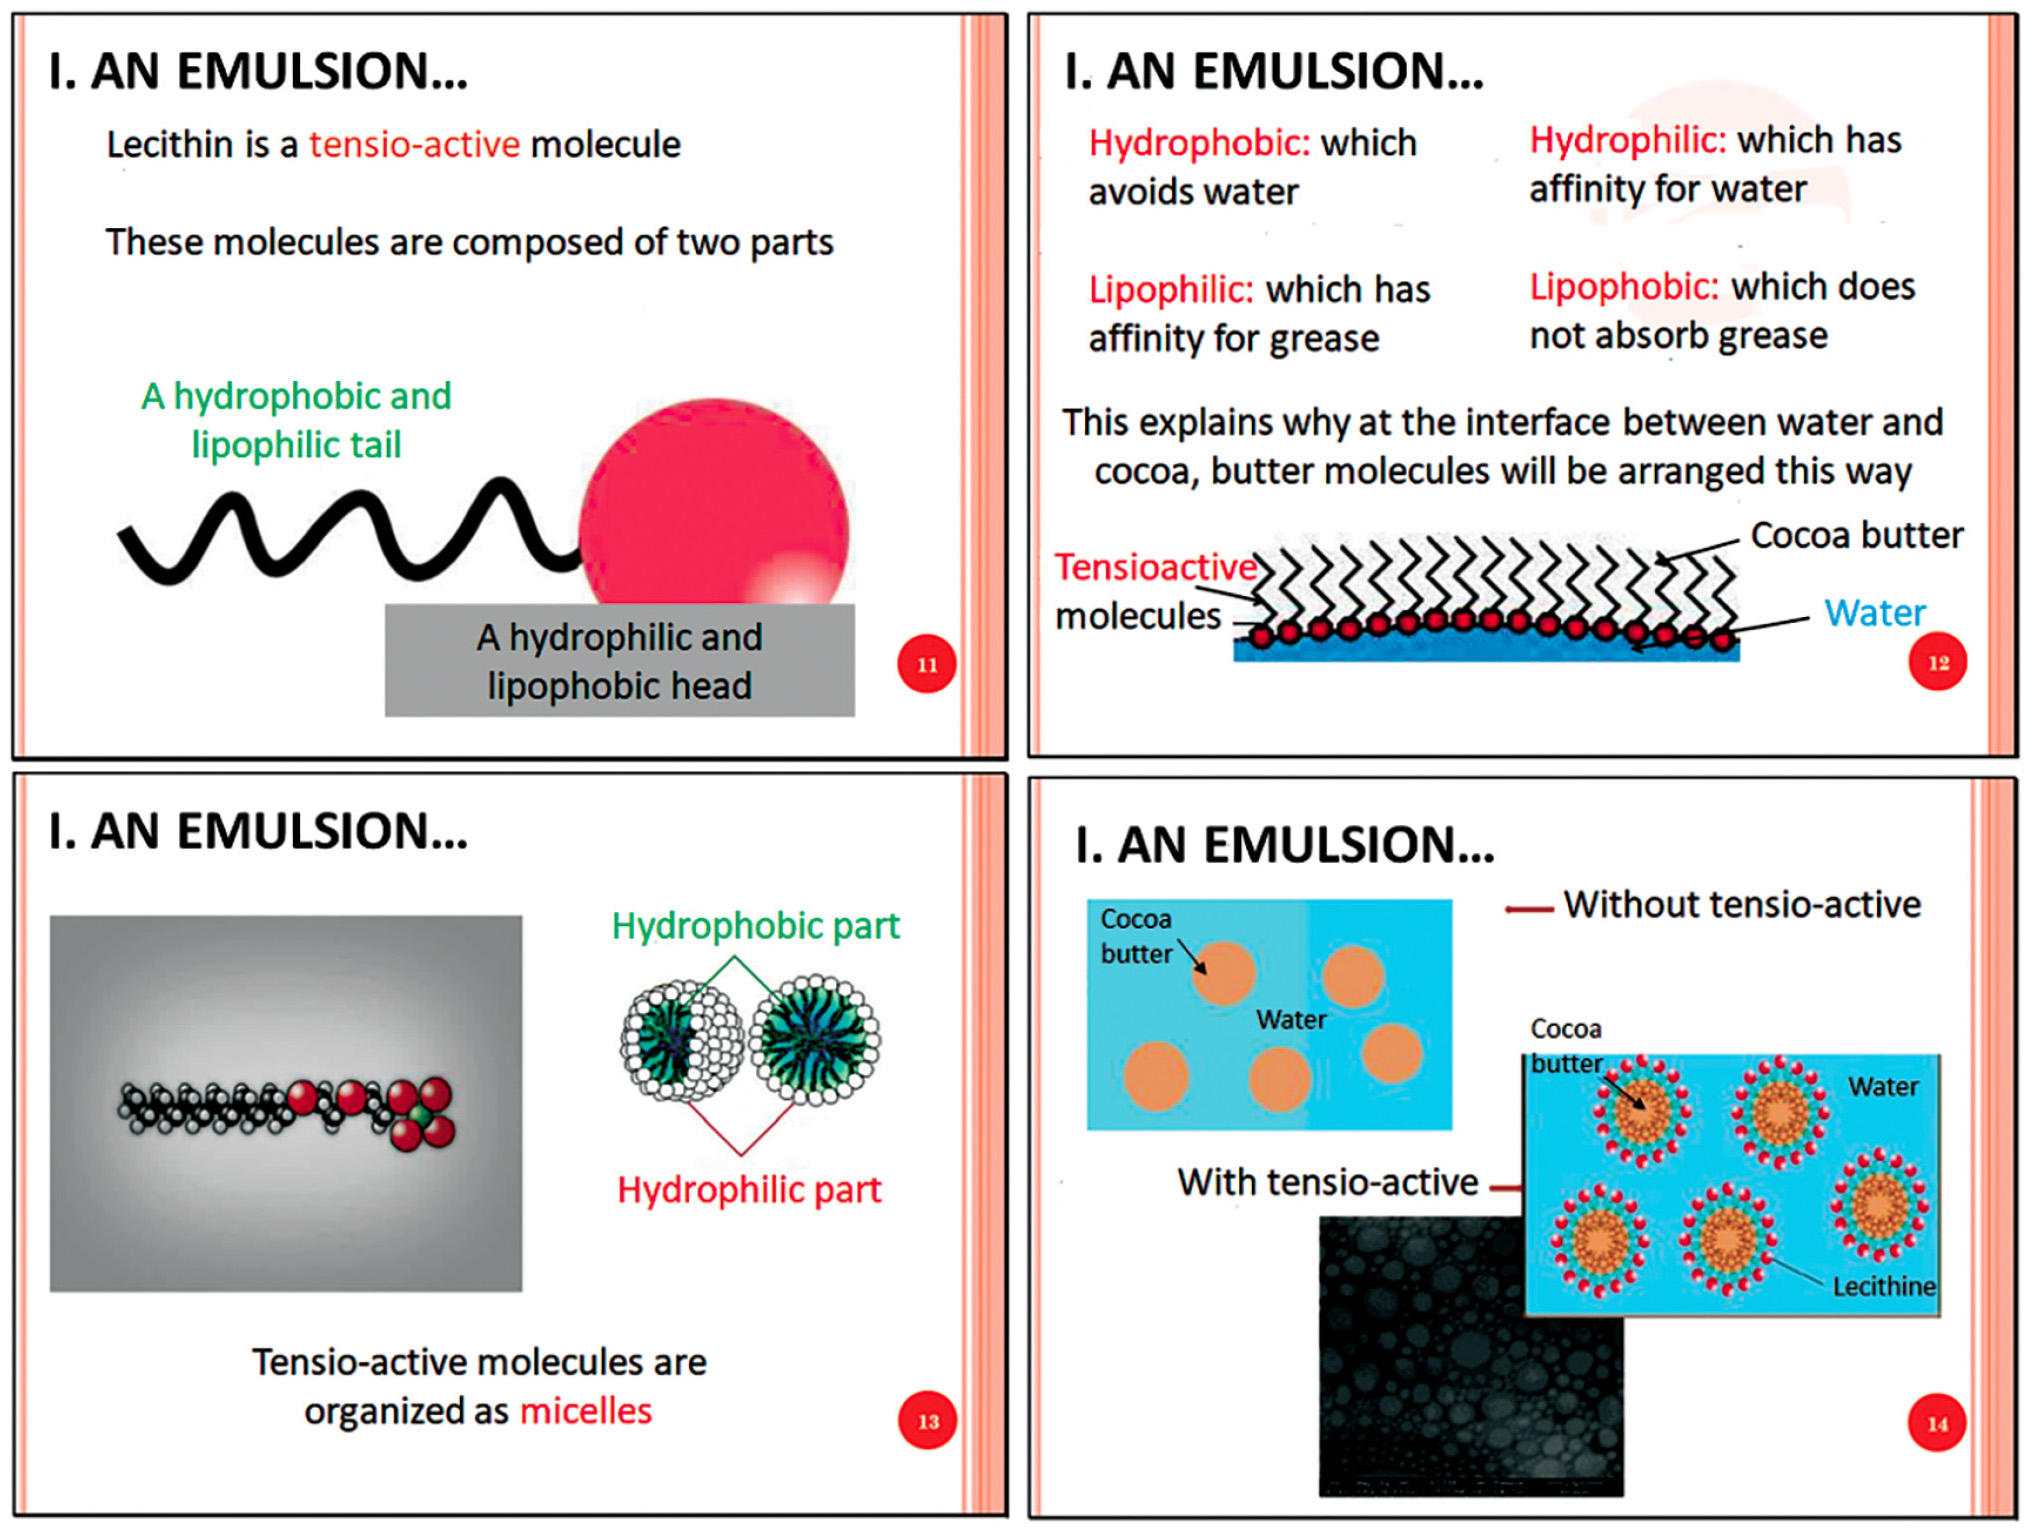 Slides corresponding to the tensio-active molecule concept presentation. Slides were translated from French to English.